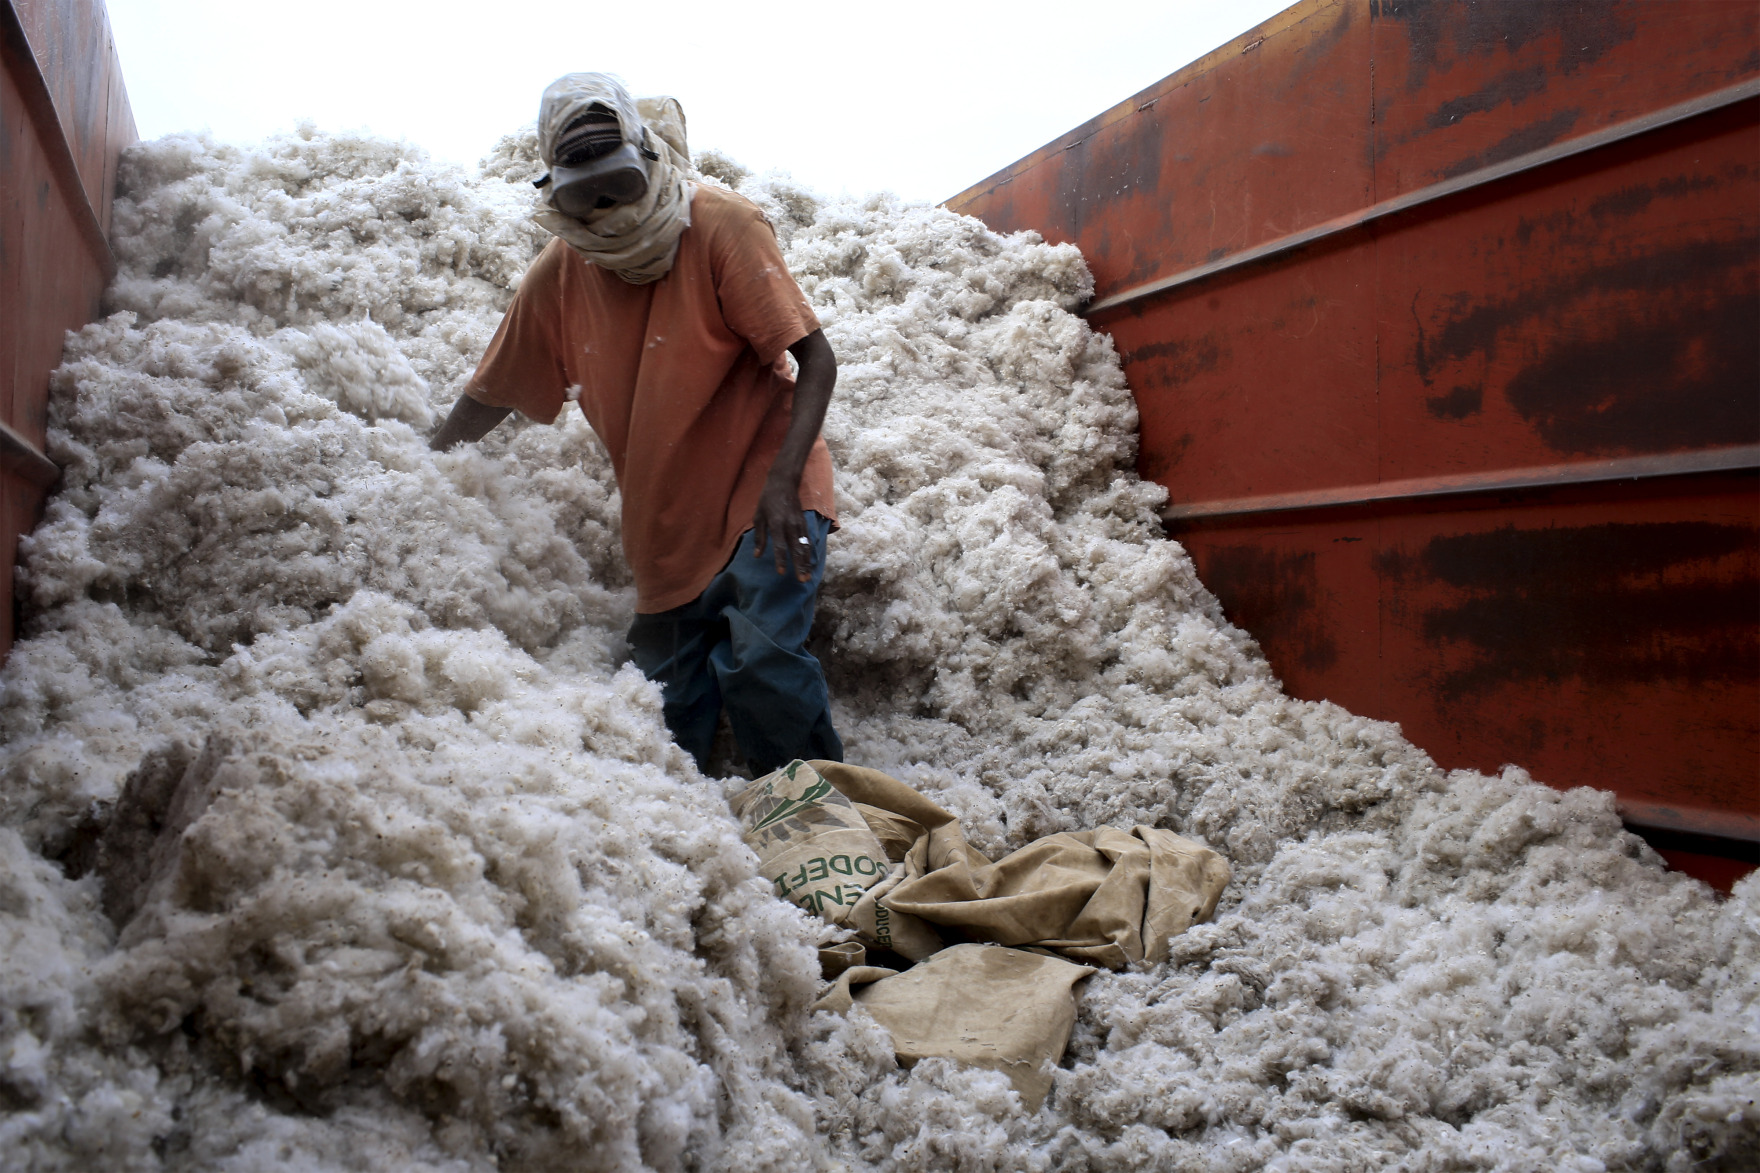 Nigeria Approves Two GMO Cotton Varieties to Increase Output - Bloomberg